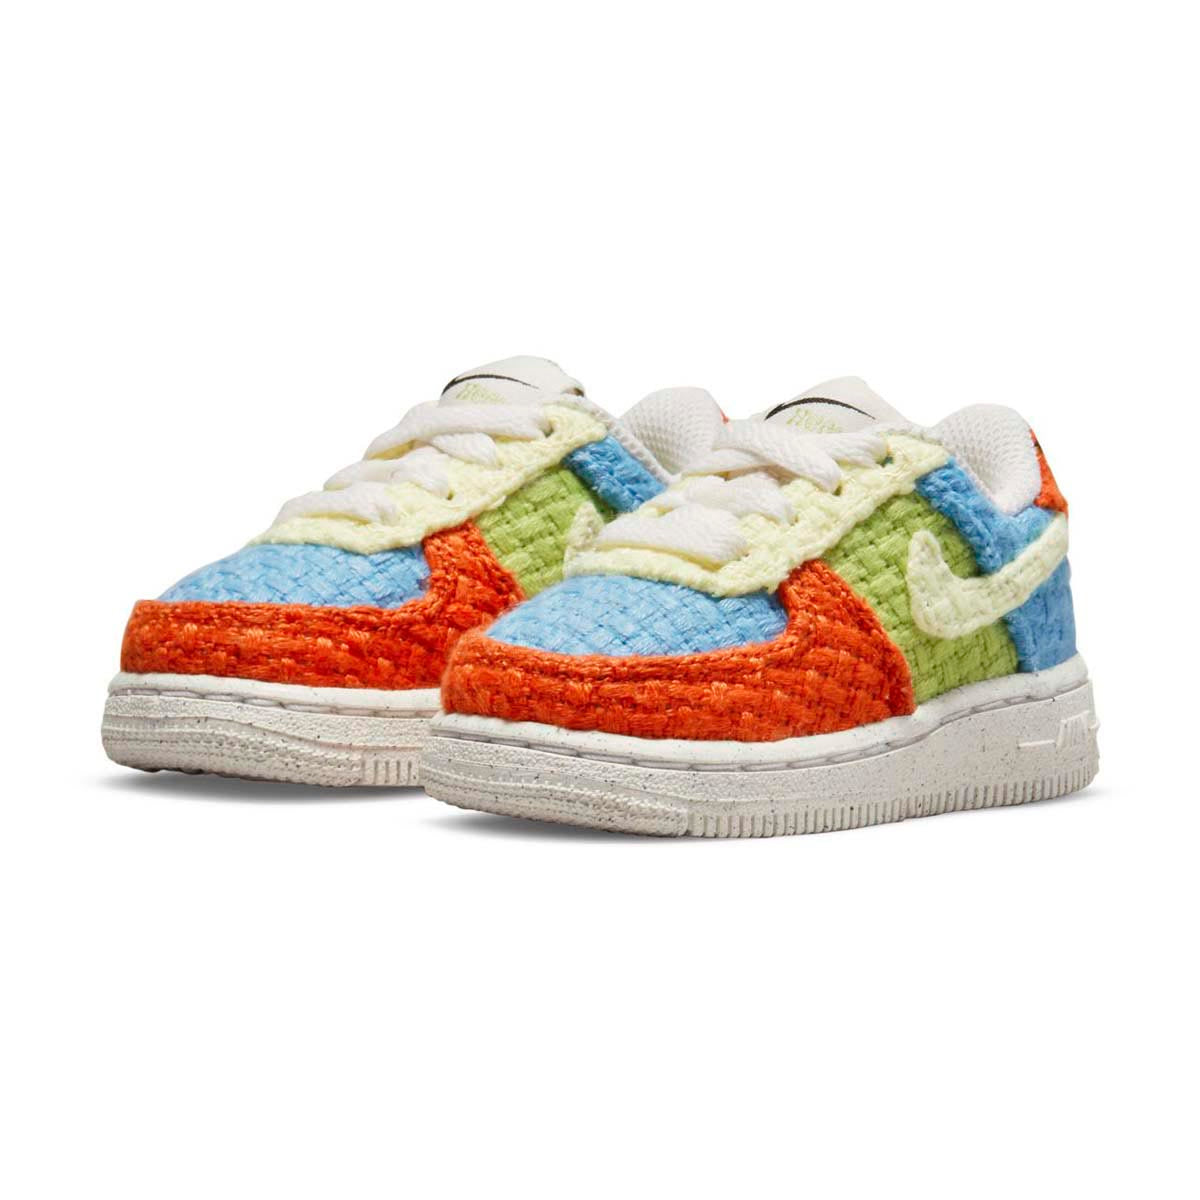 nike force 1 lv8 baby